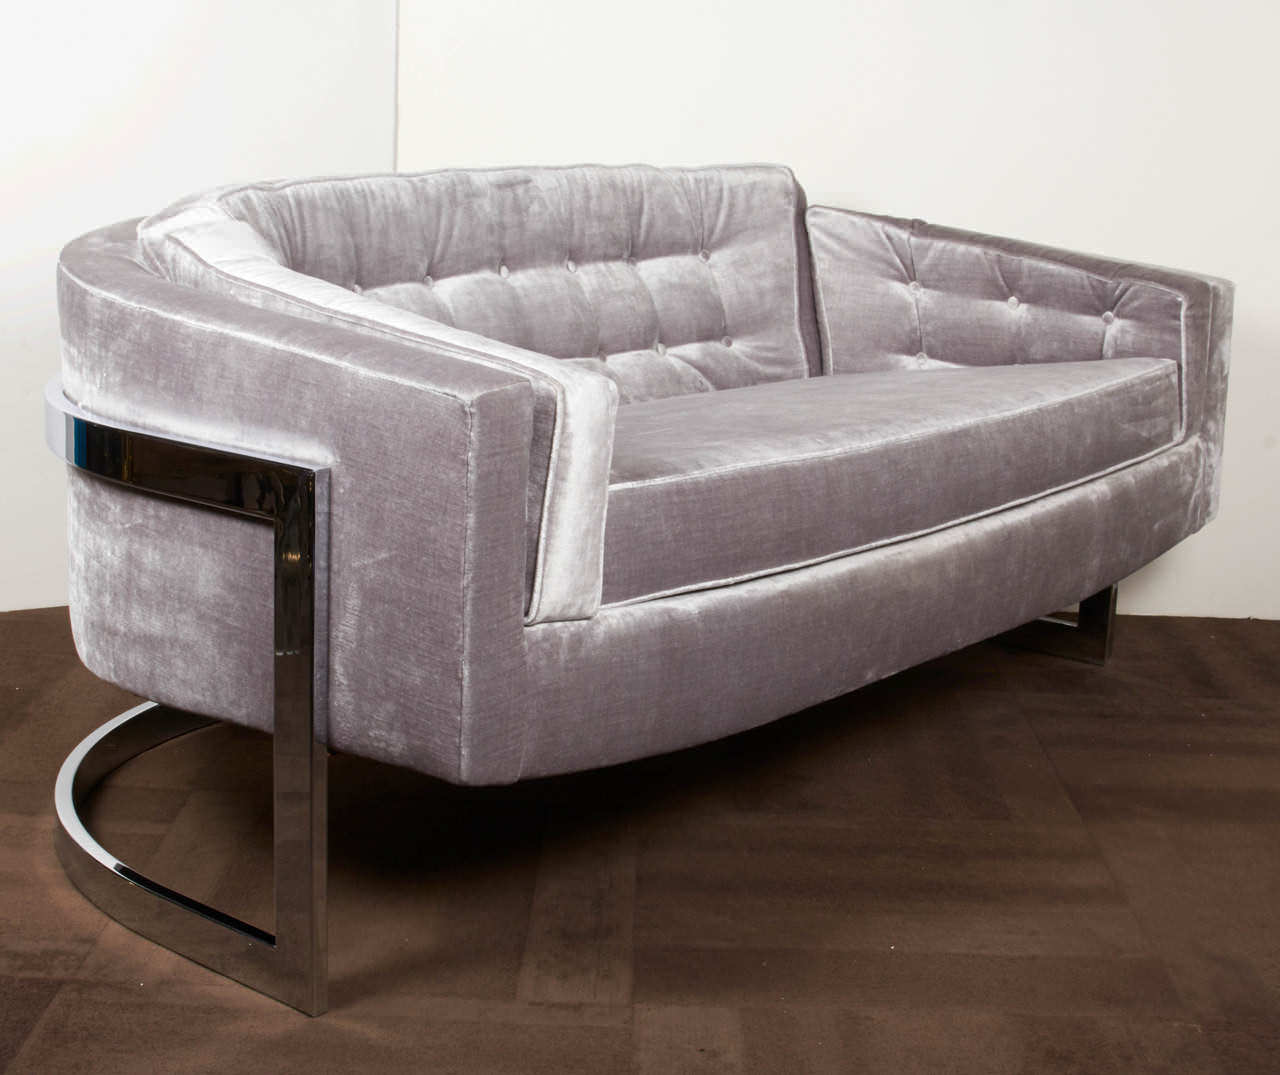 Image of: curved loveseat cuddle couch